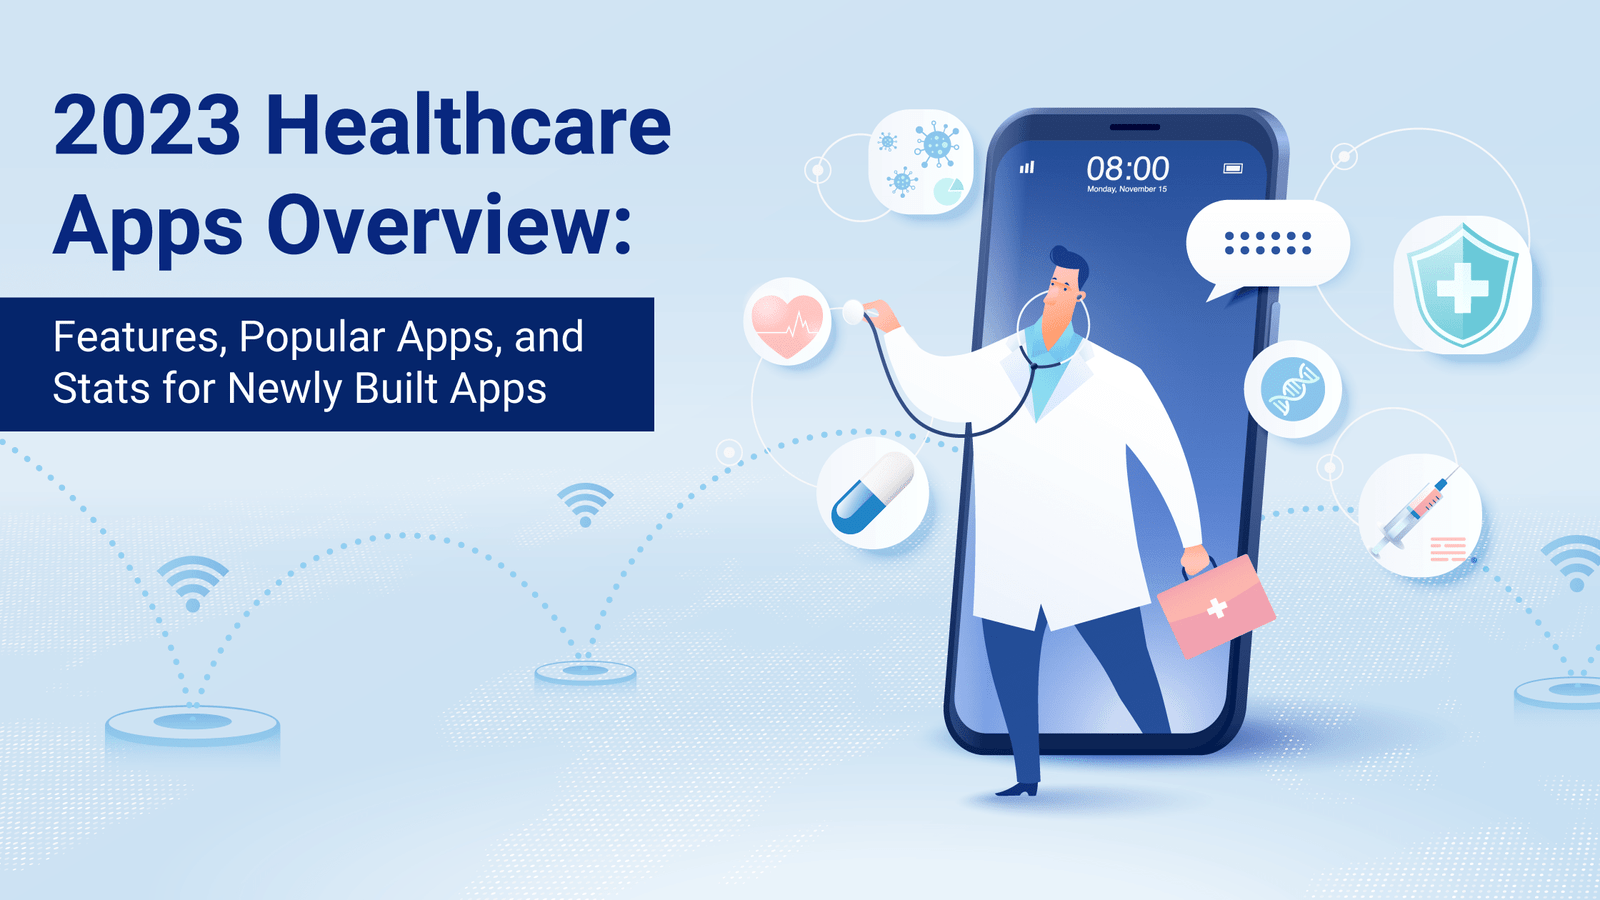 2023 Healthcare Apps Overview: Features, Popular Apps, and Stats for Newly Built Apps